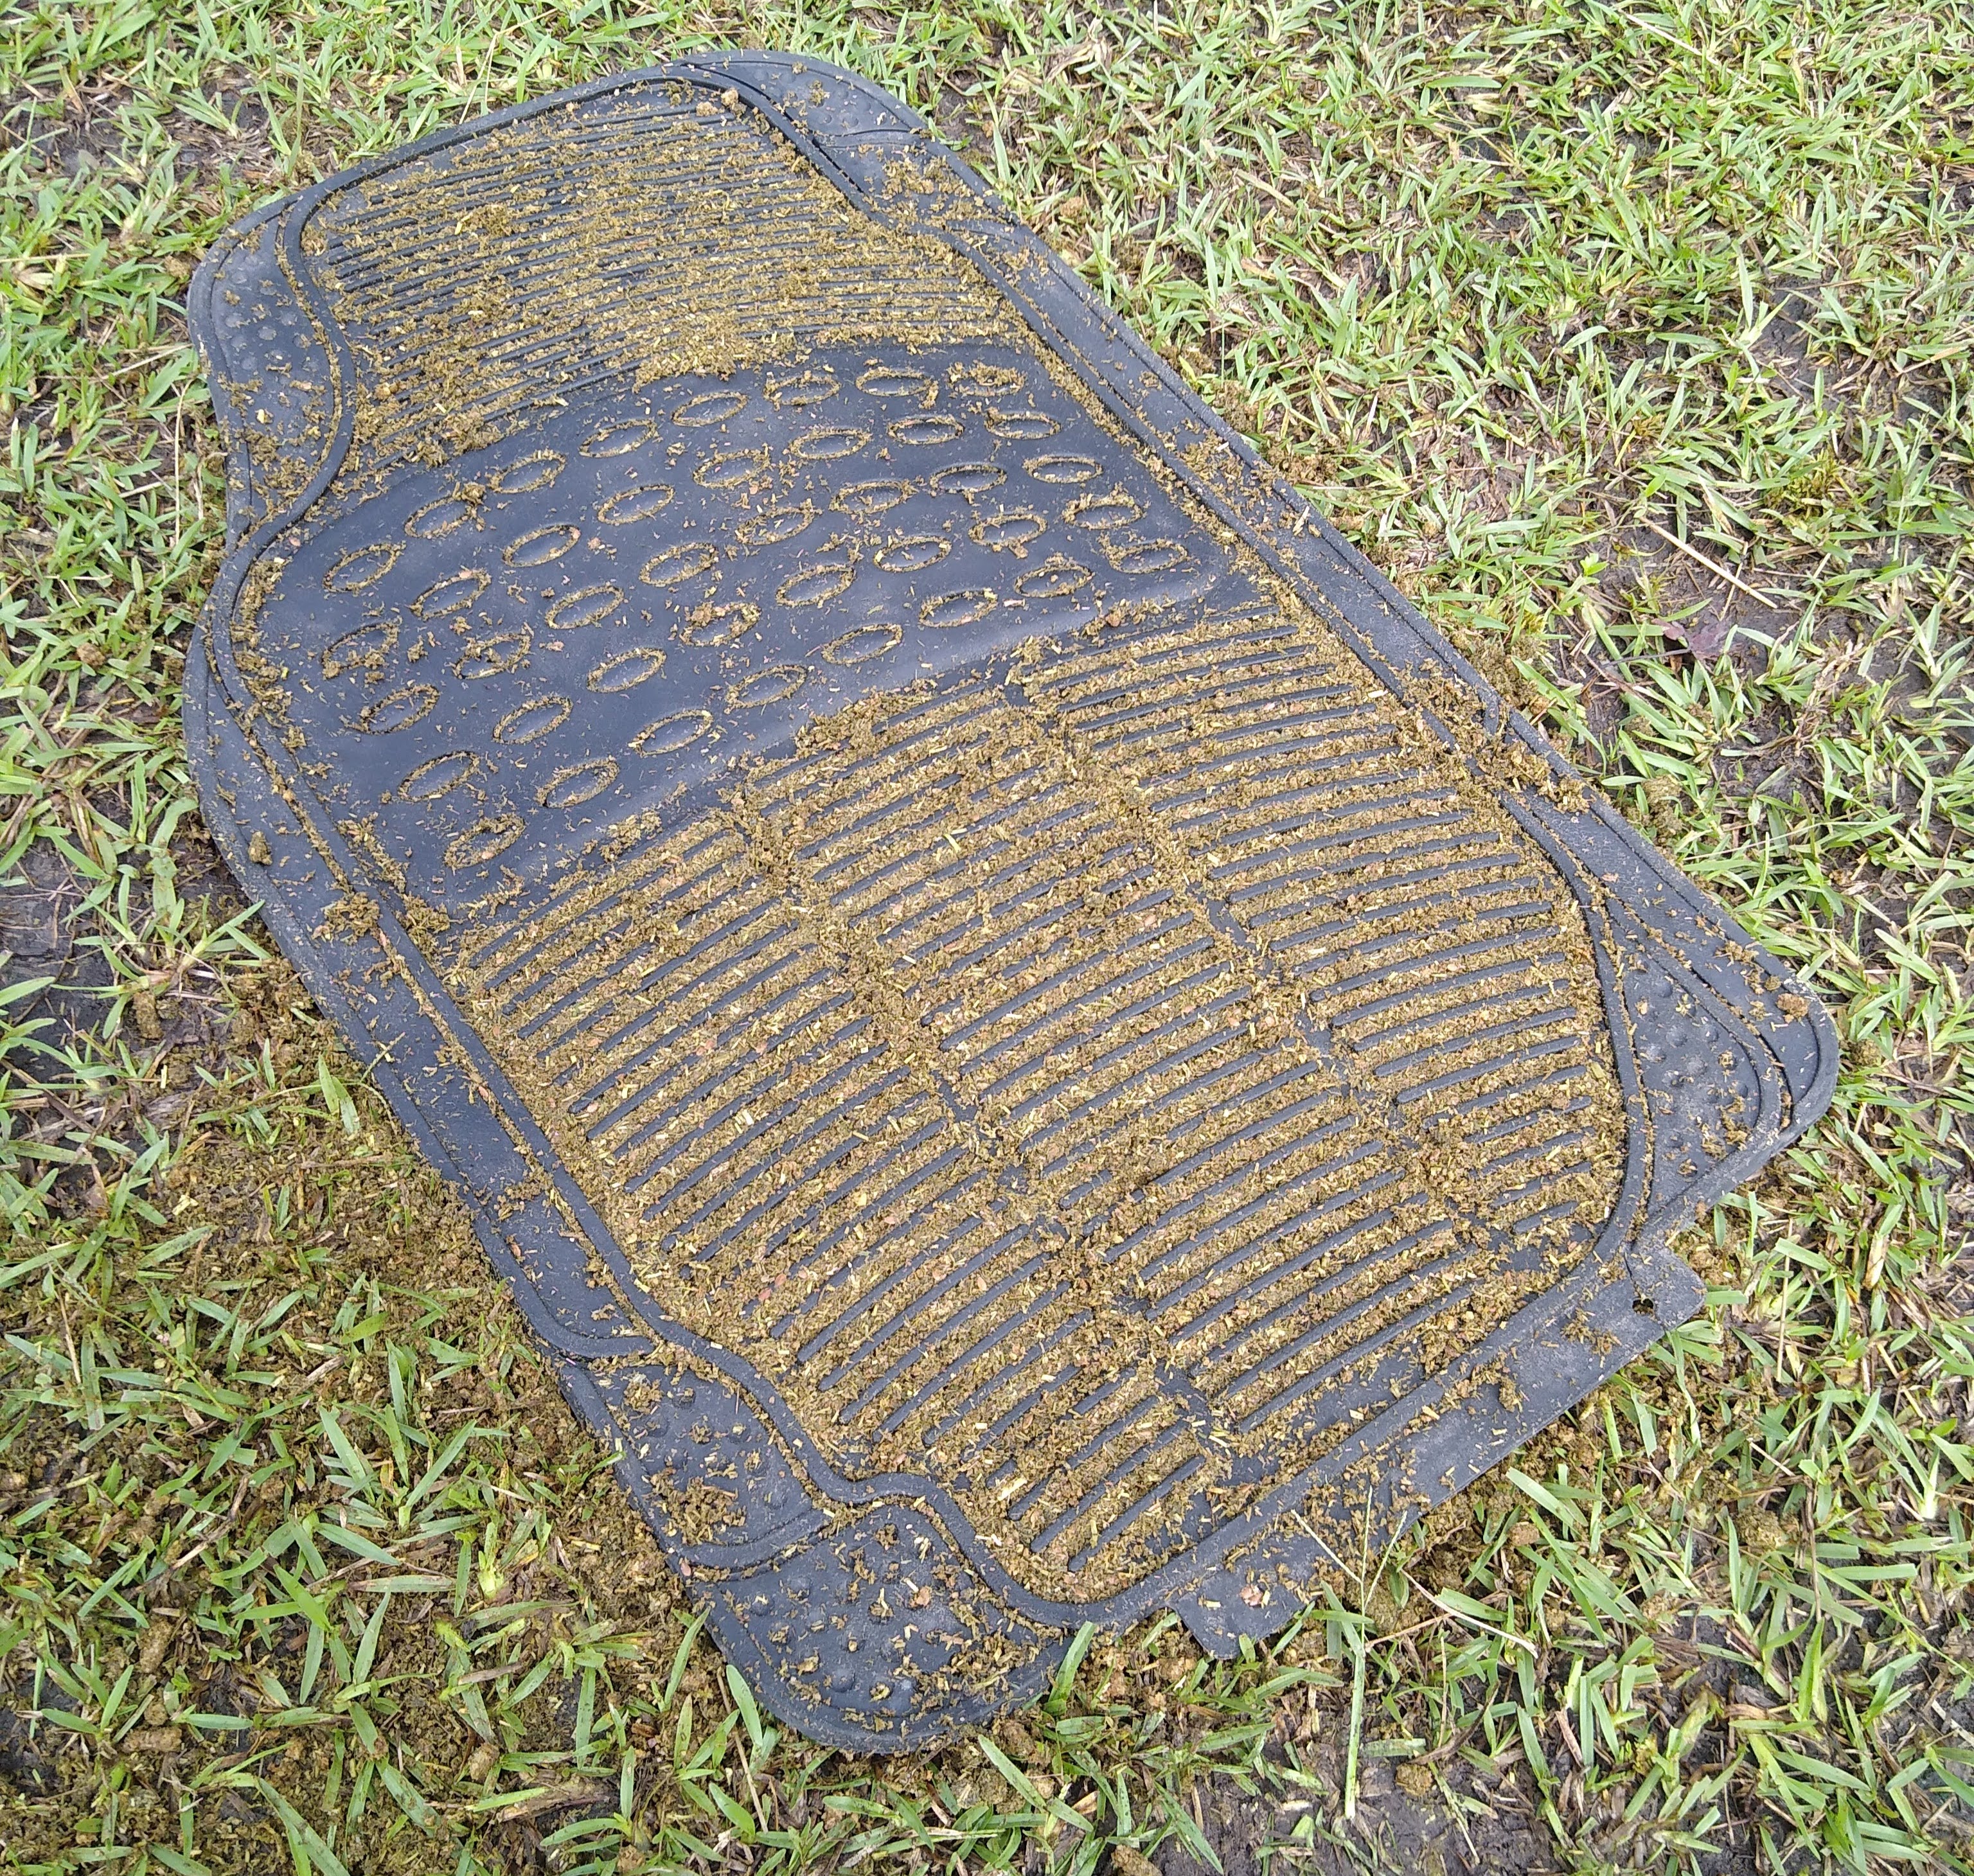 The DIY slow feeder mat for horses after a meal, showing leftover feed in the mat treads.